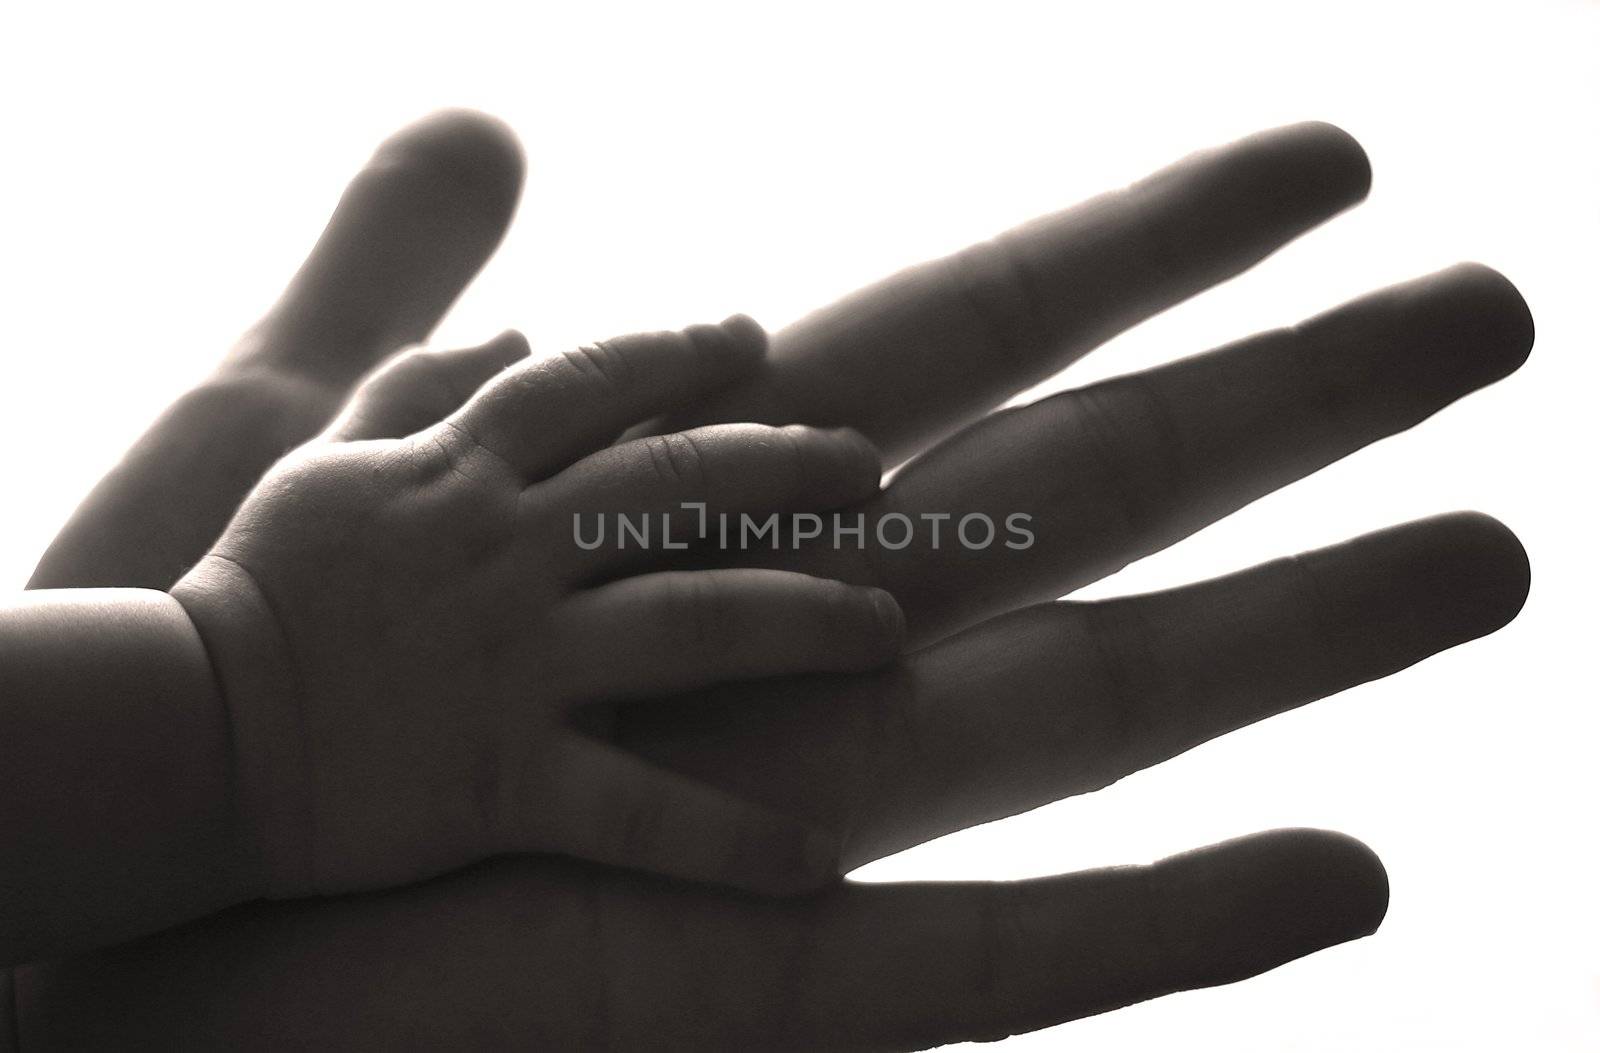 The image of hands of parents and the kid. b/w+sepia